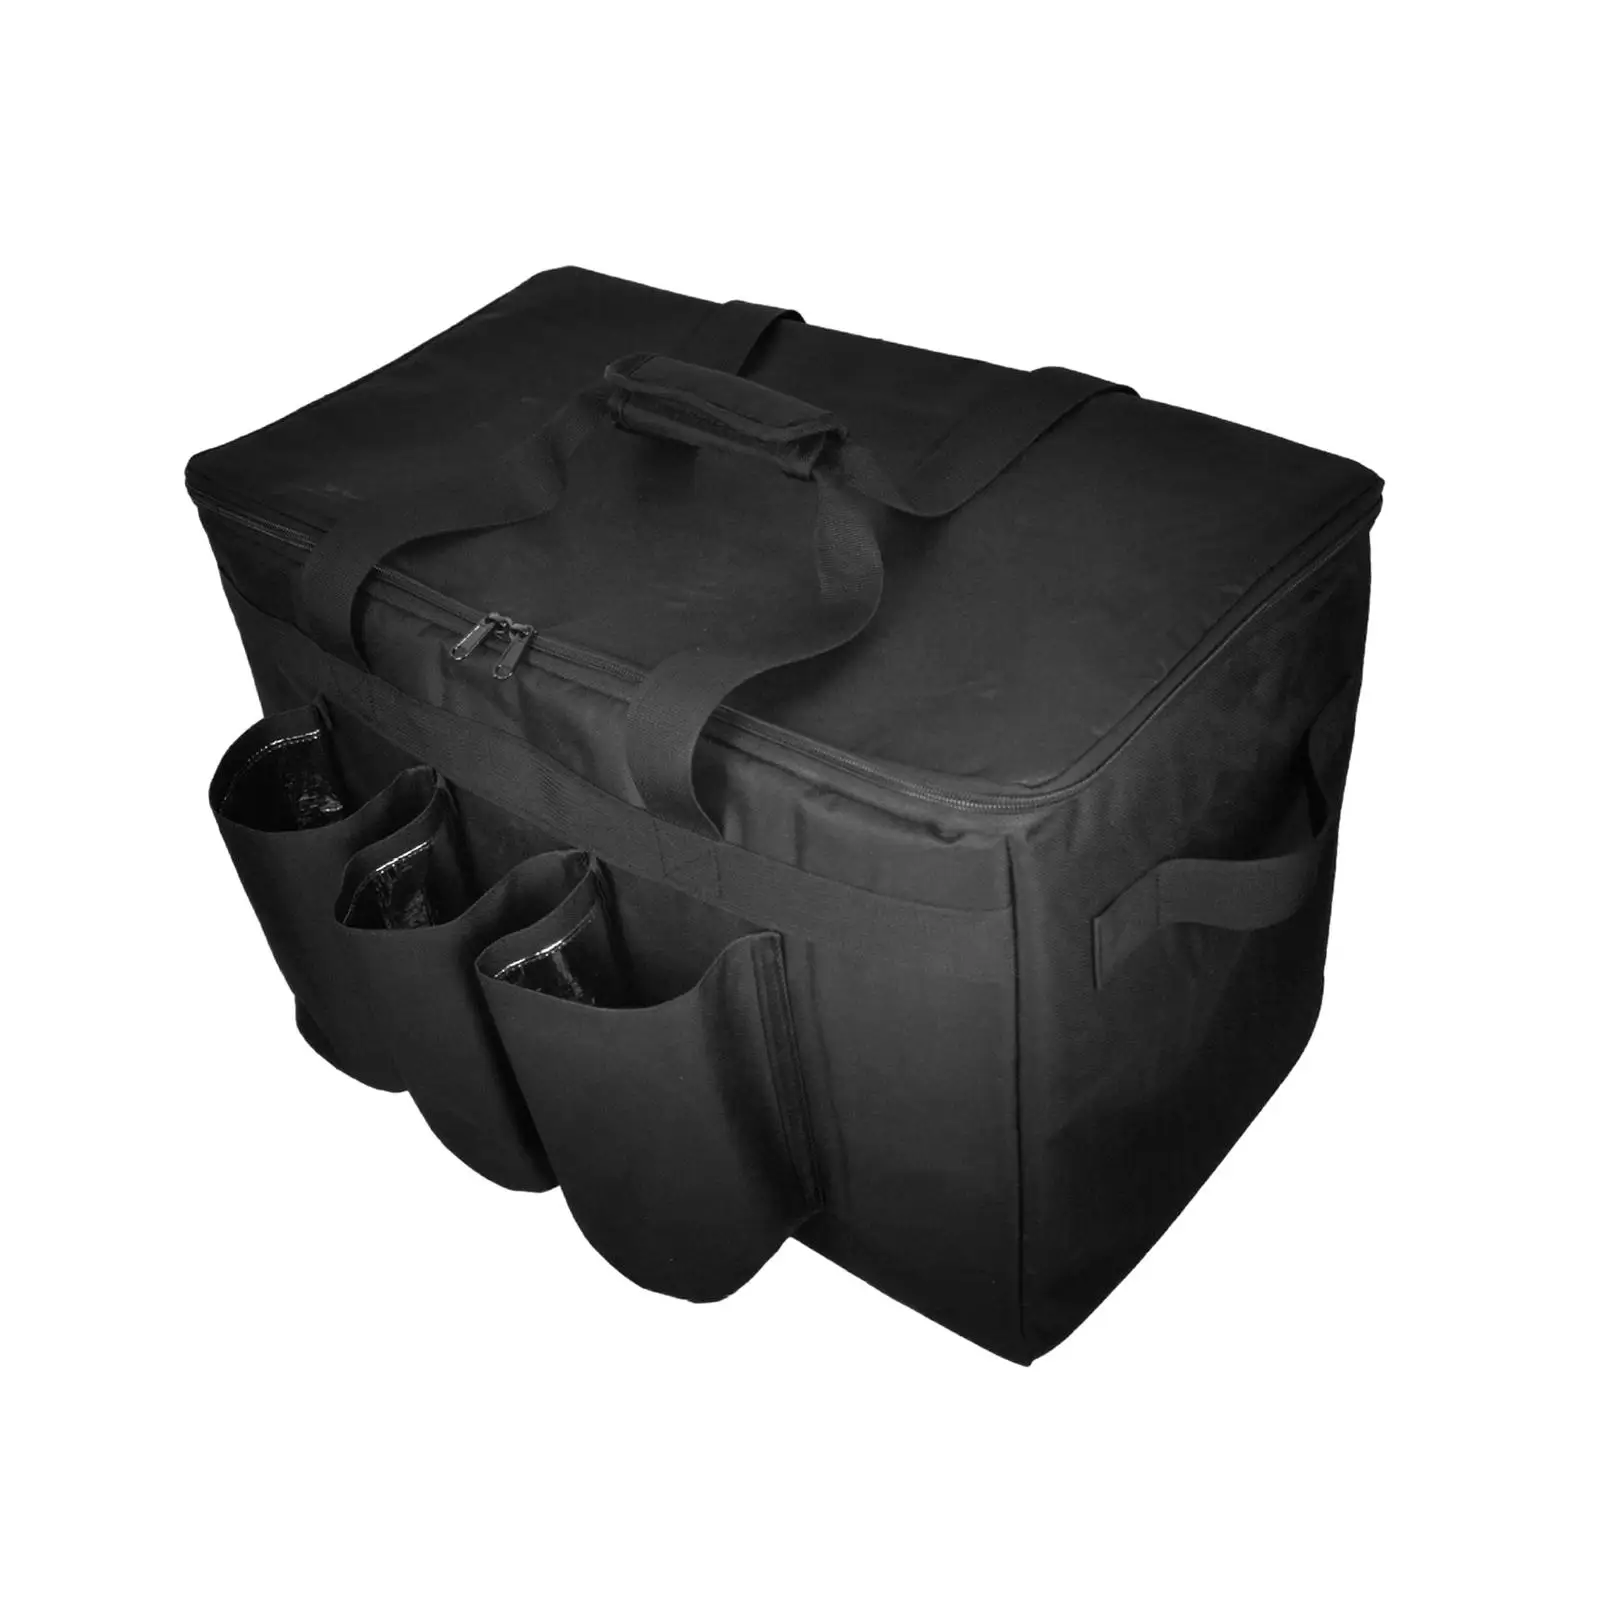 Insulated Food Delivery Bag Reusable Lightweight Food Warmer Grocery Bag for Outdoor Professional Commercial Picnic Restaurant